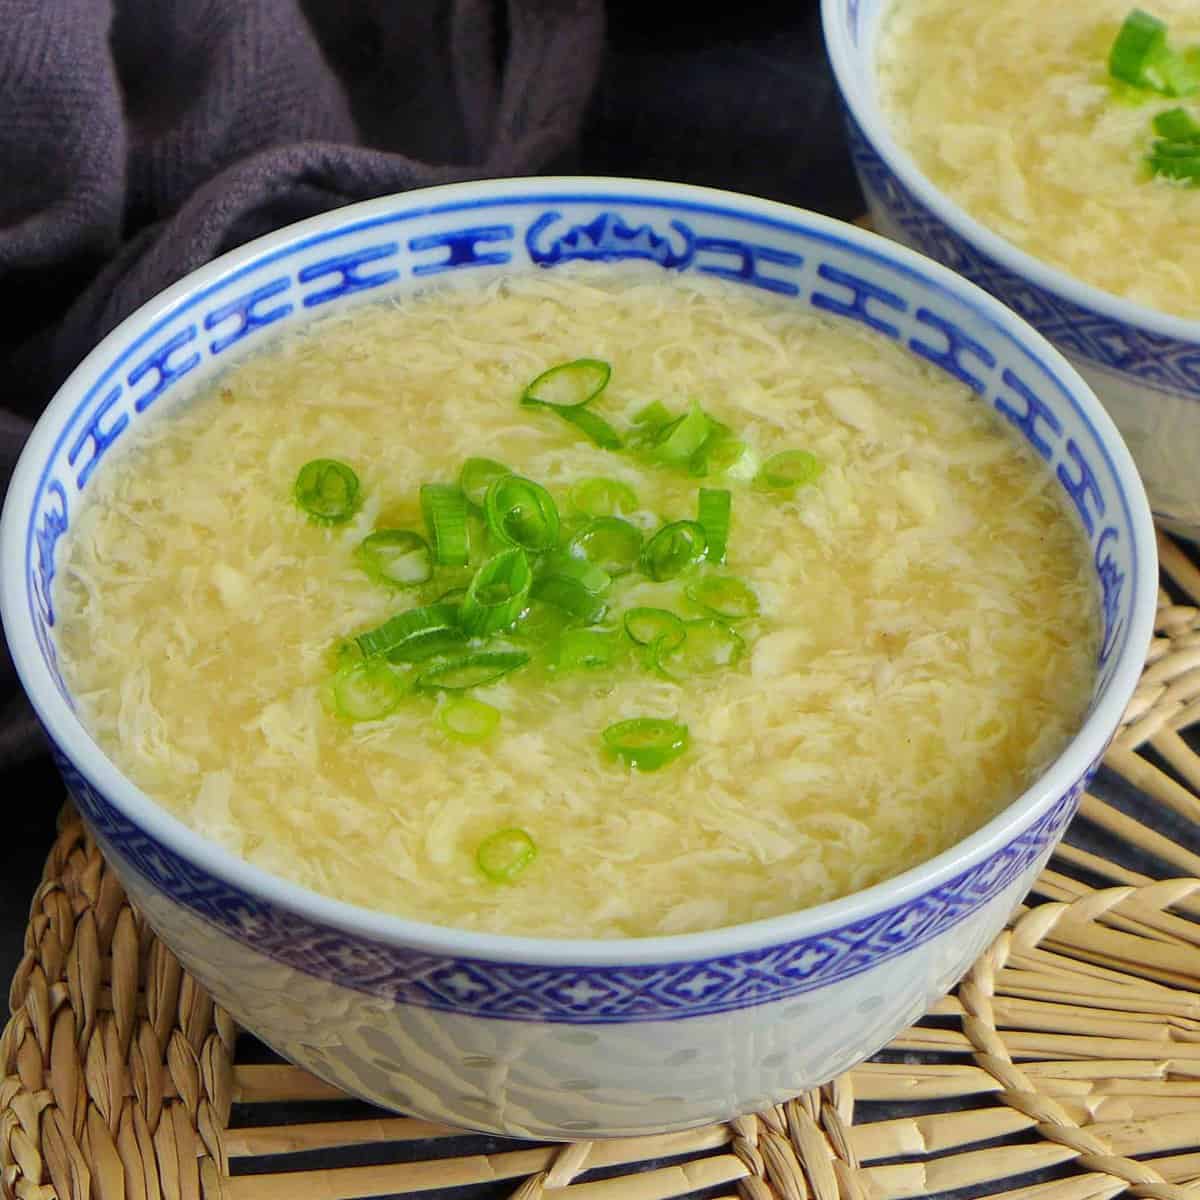 https://redhousespice.com/wp-content/uploads/2022/10/egg-drop-soup-with-scallions-scaled.jpg